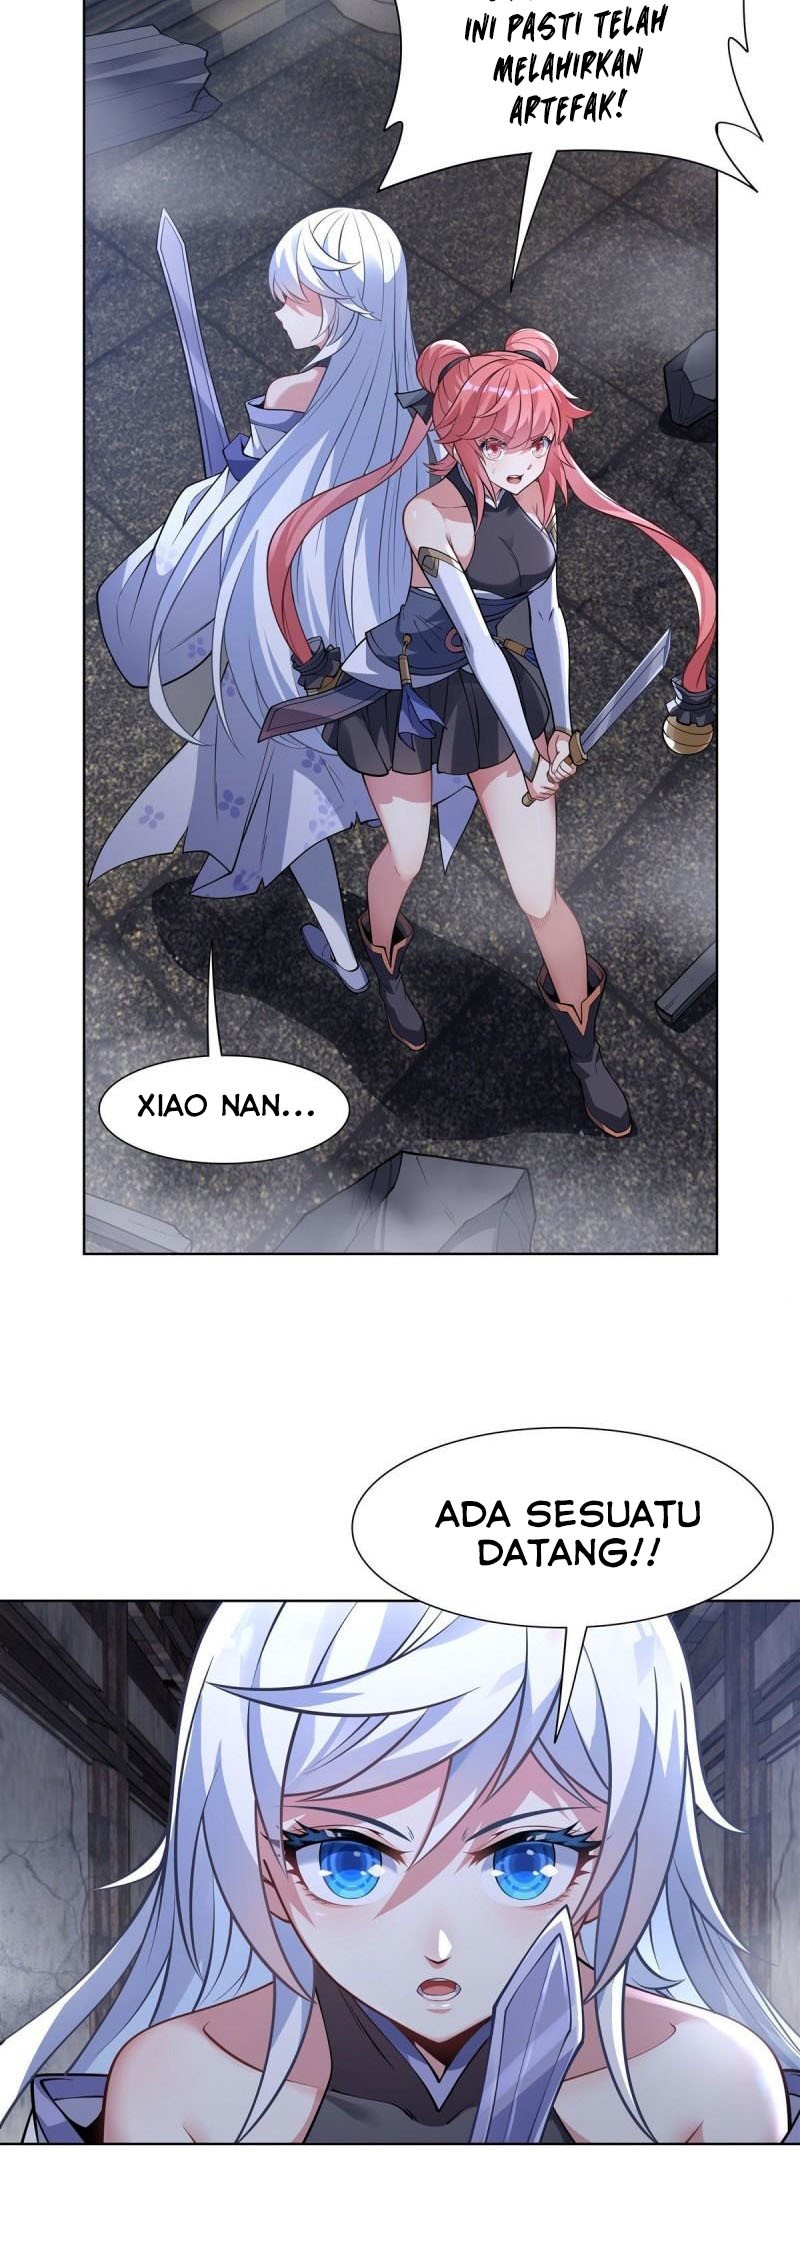 Dilarang COPAS - situs resmi www.mangacanblog.com - Komik my female apprentices are all big shots from the future 053 - chapter 53 54 Indonesia my female apprentices are all big shots from the future 053 - chapter 53 Terbaru 3|Baca Manga Komik Indonesia|Mangacan